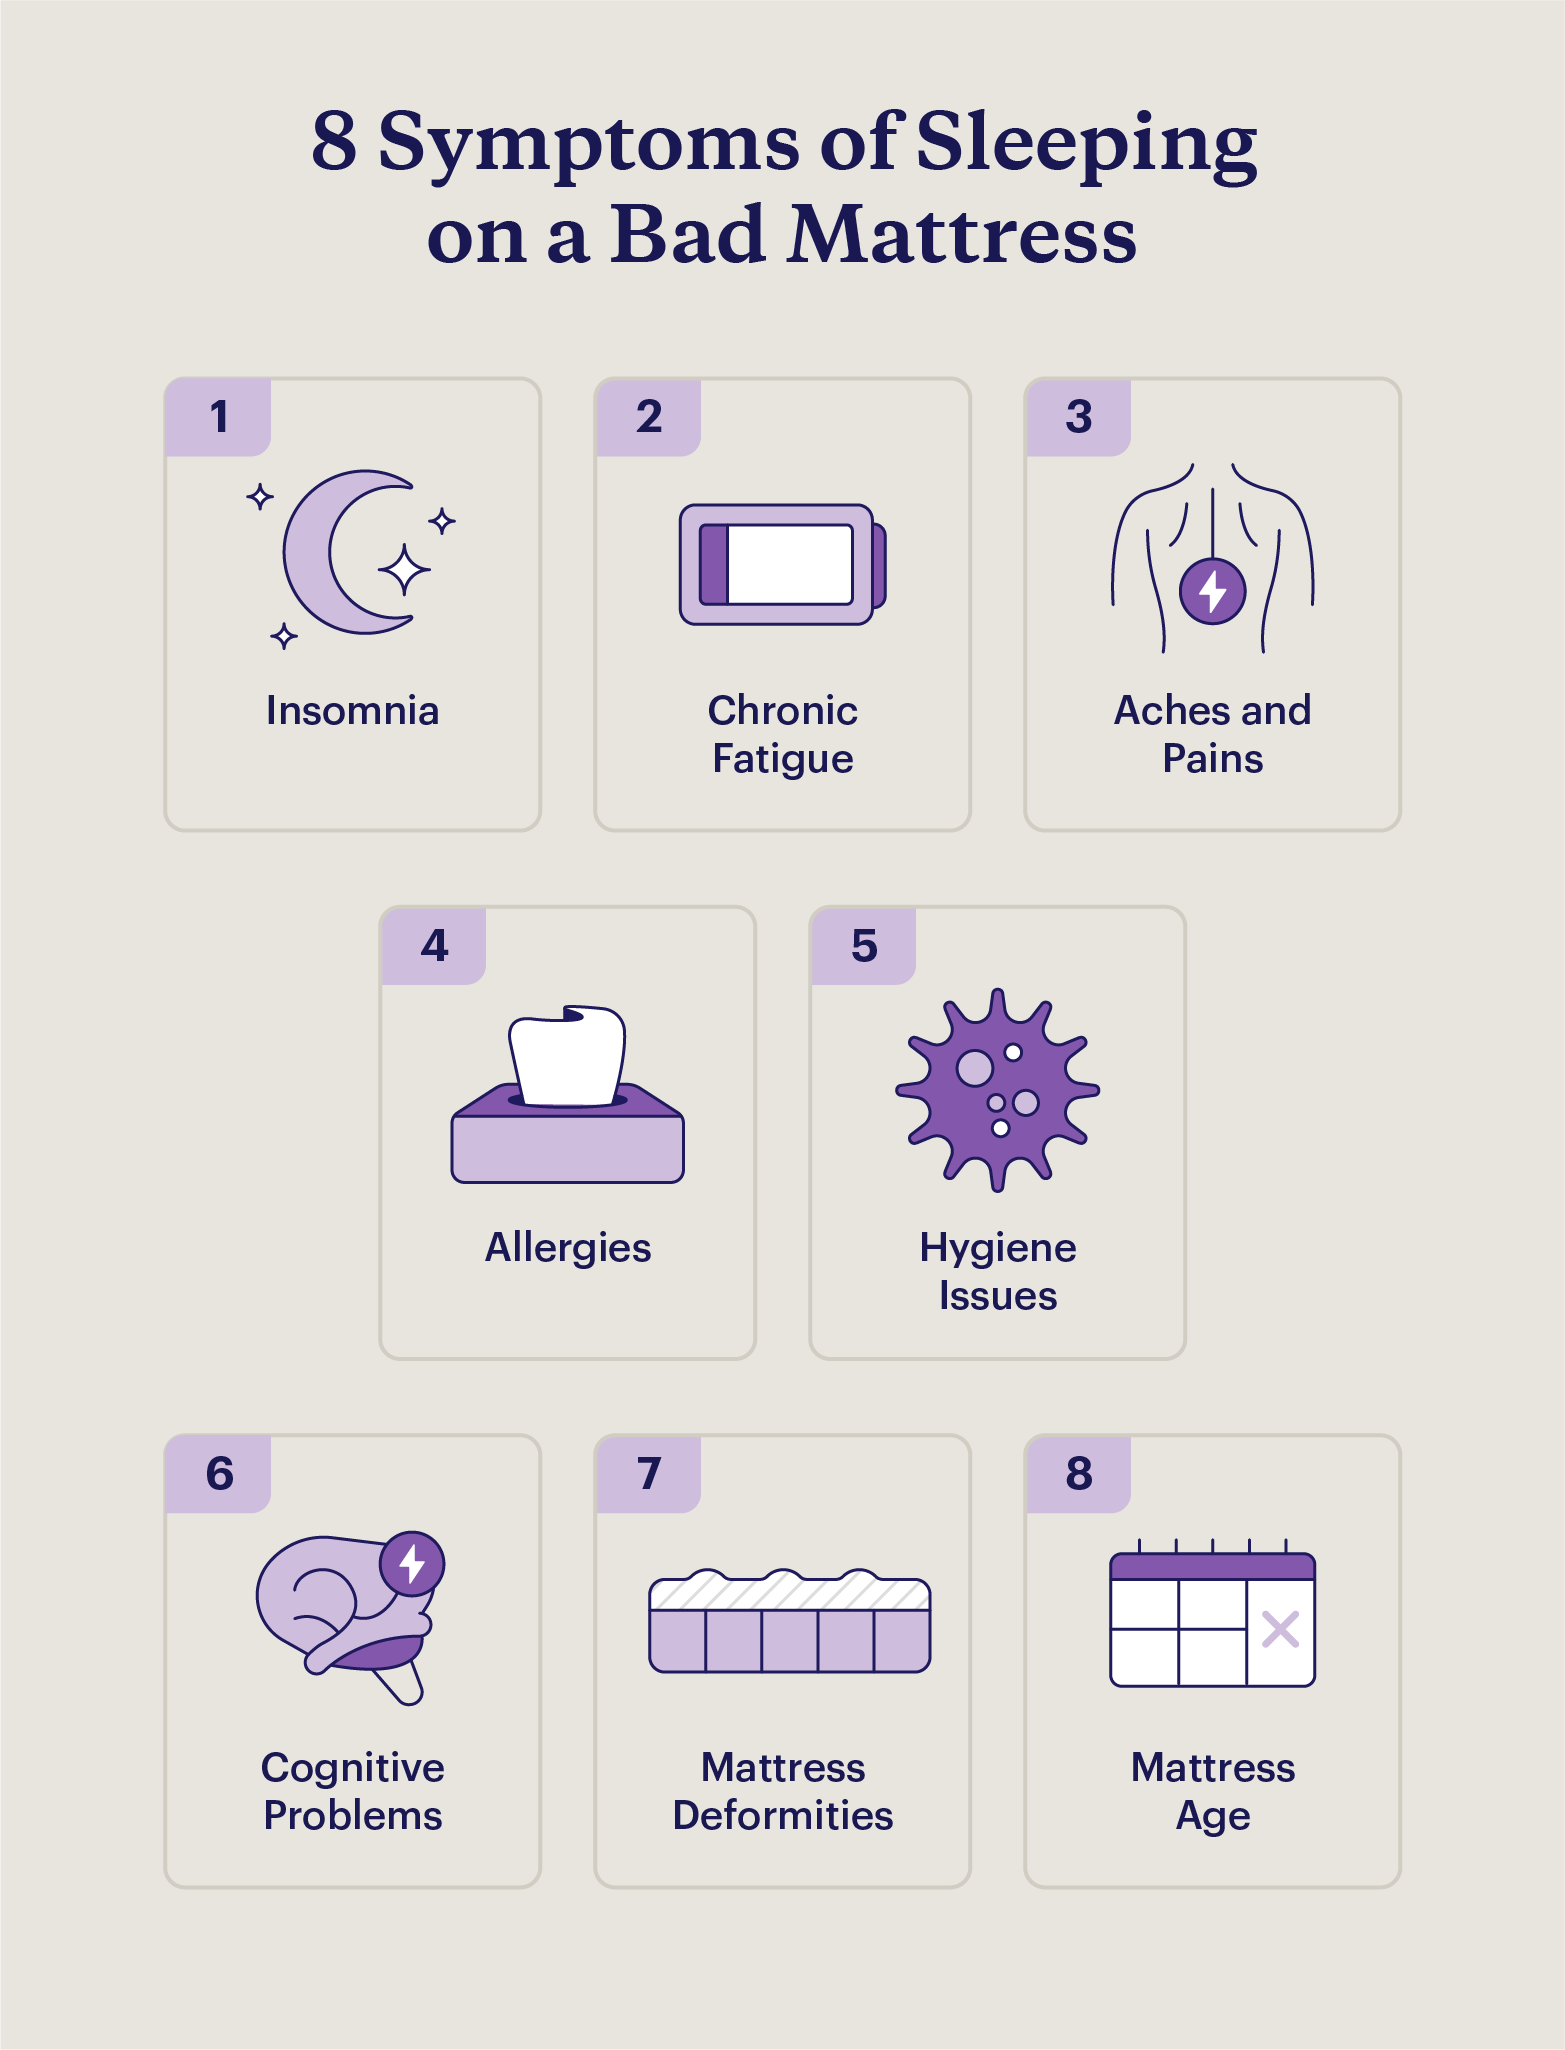 A graphic depicting 8 symptoms of sleeping on a bad mattress.